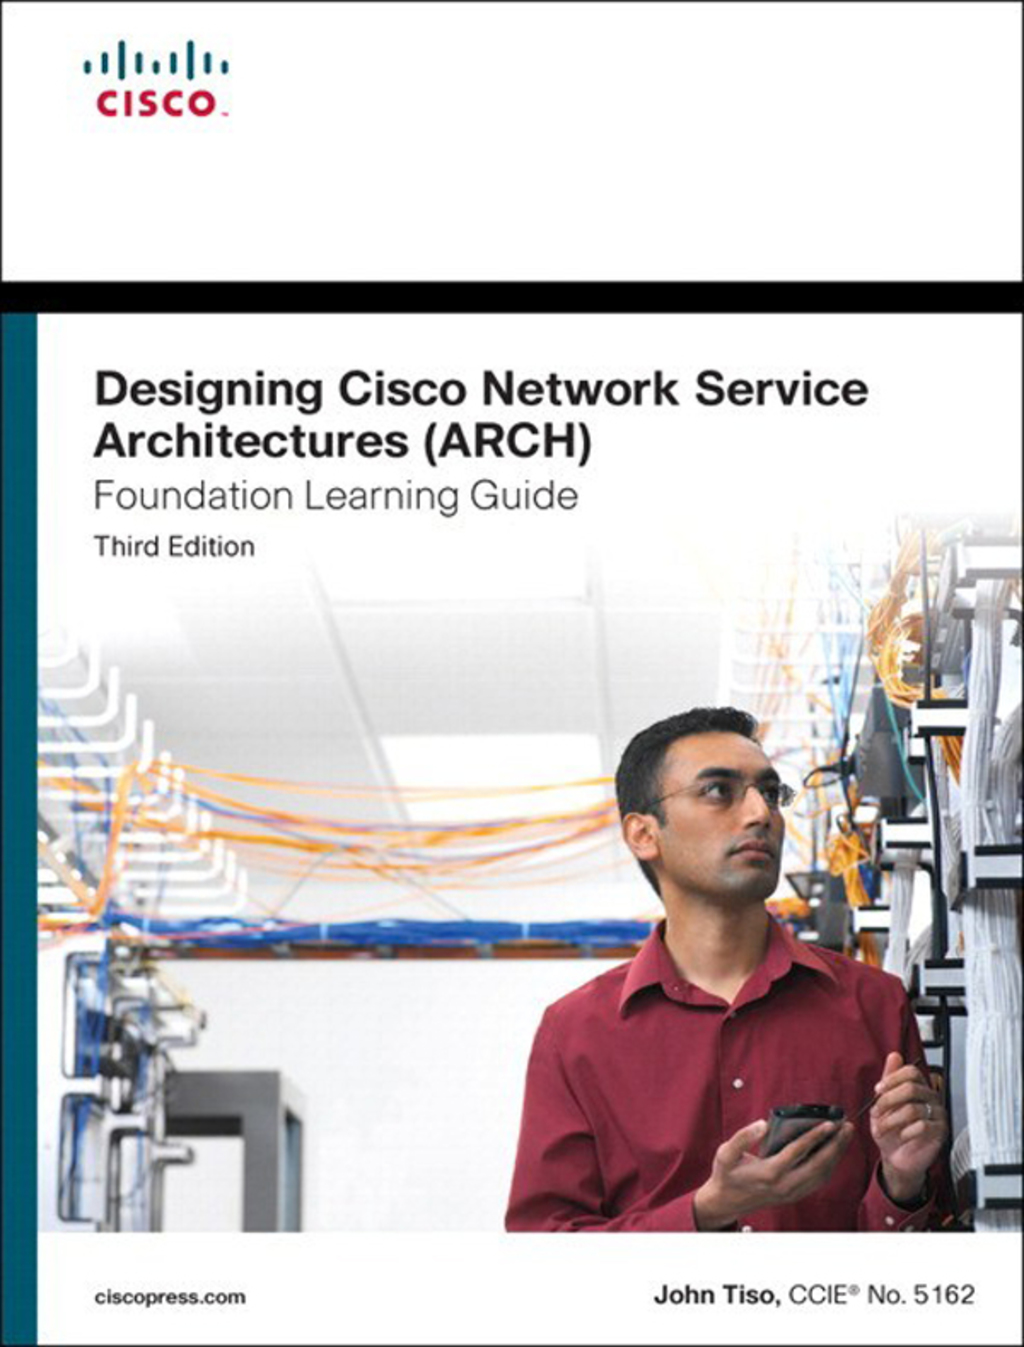 Designing Cisco Network Service Architectures (ARCH) Foundation Learning Guide - 3rd Edition (eBook)